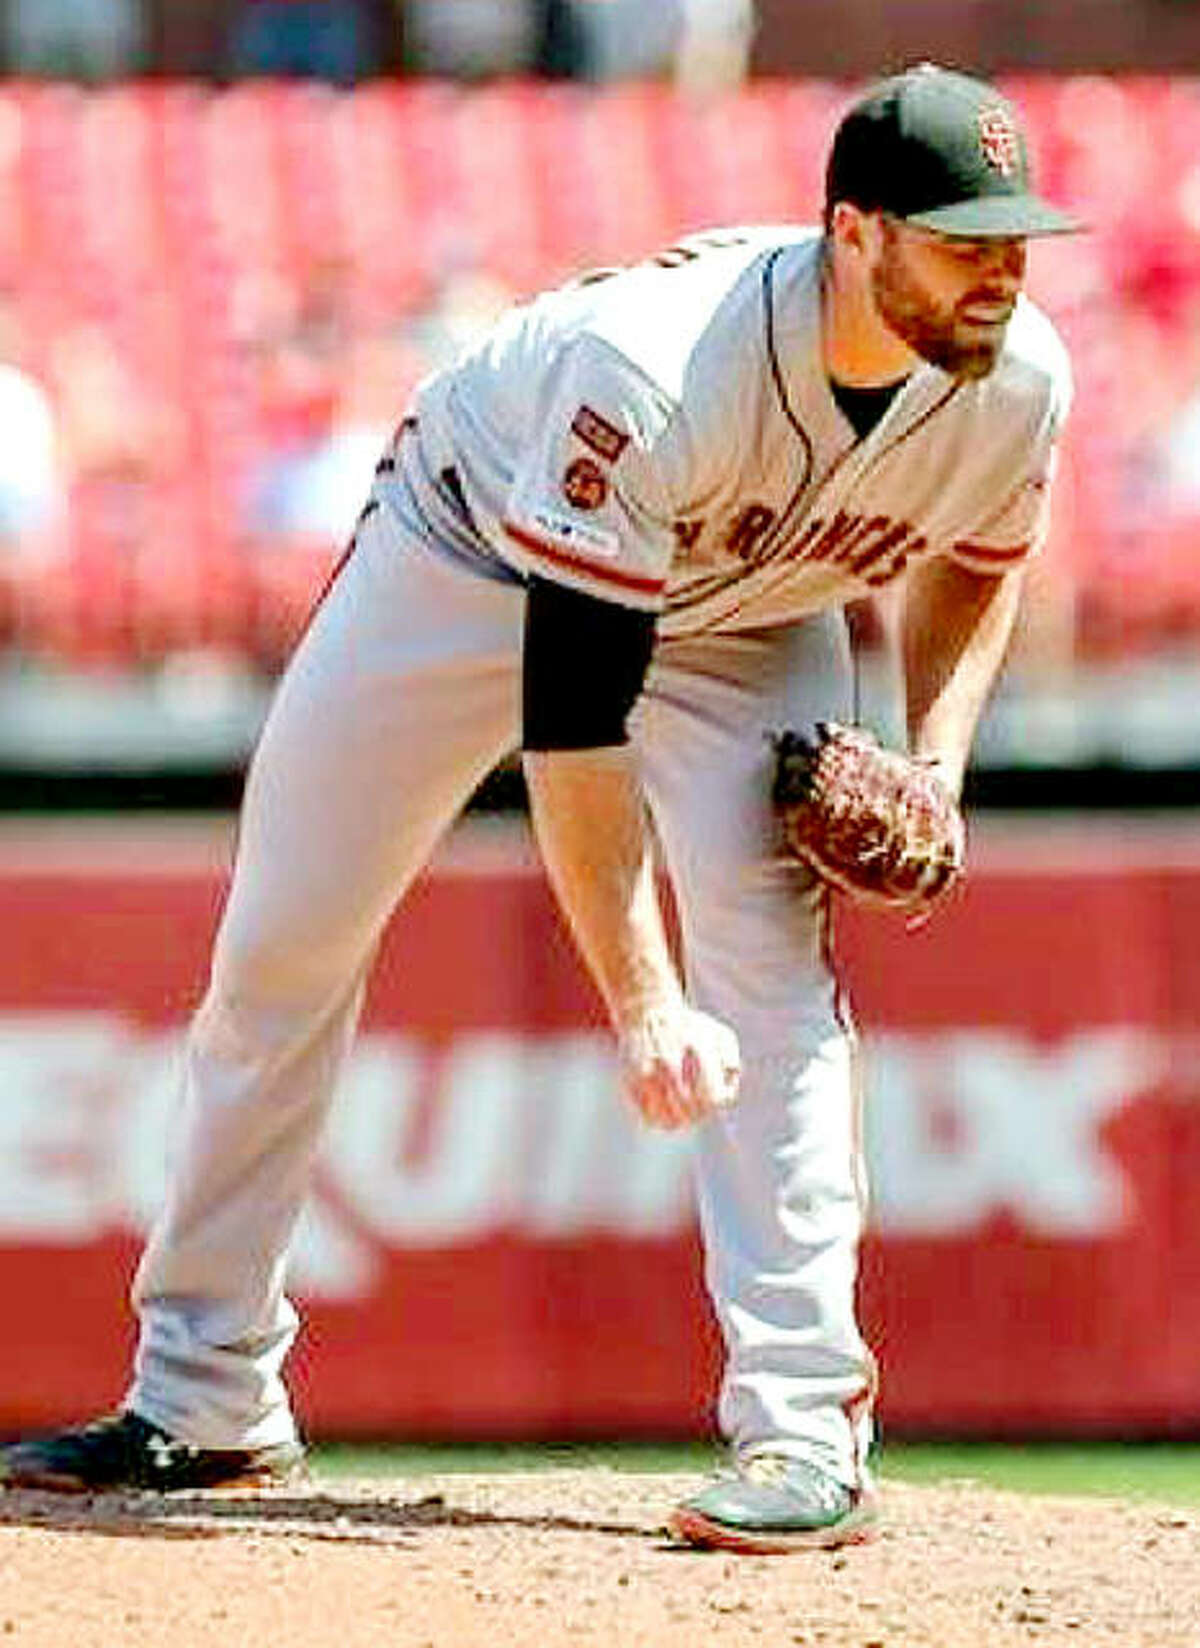 Carrollton High graduate Sam Coonrod of the San Francisco Giants looks in for a sign from his catcher a game against the Cardinals at Busch Stadium.Coonrod has returned to the active roster after spending much of August on the Injured Reserved list with a lat strain.